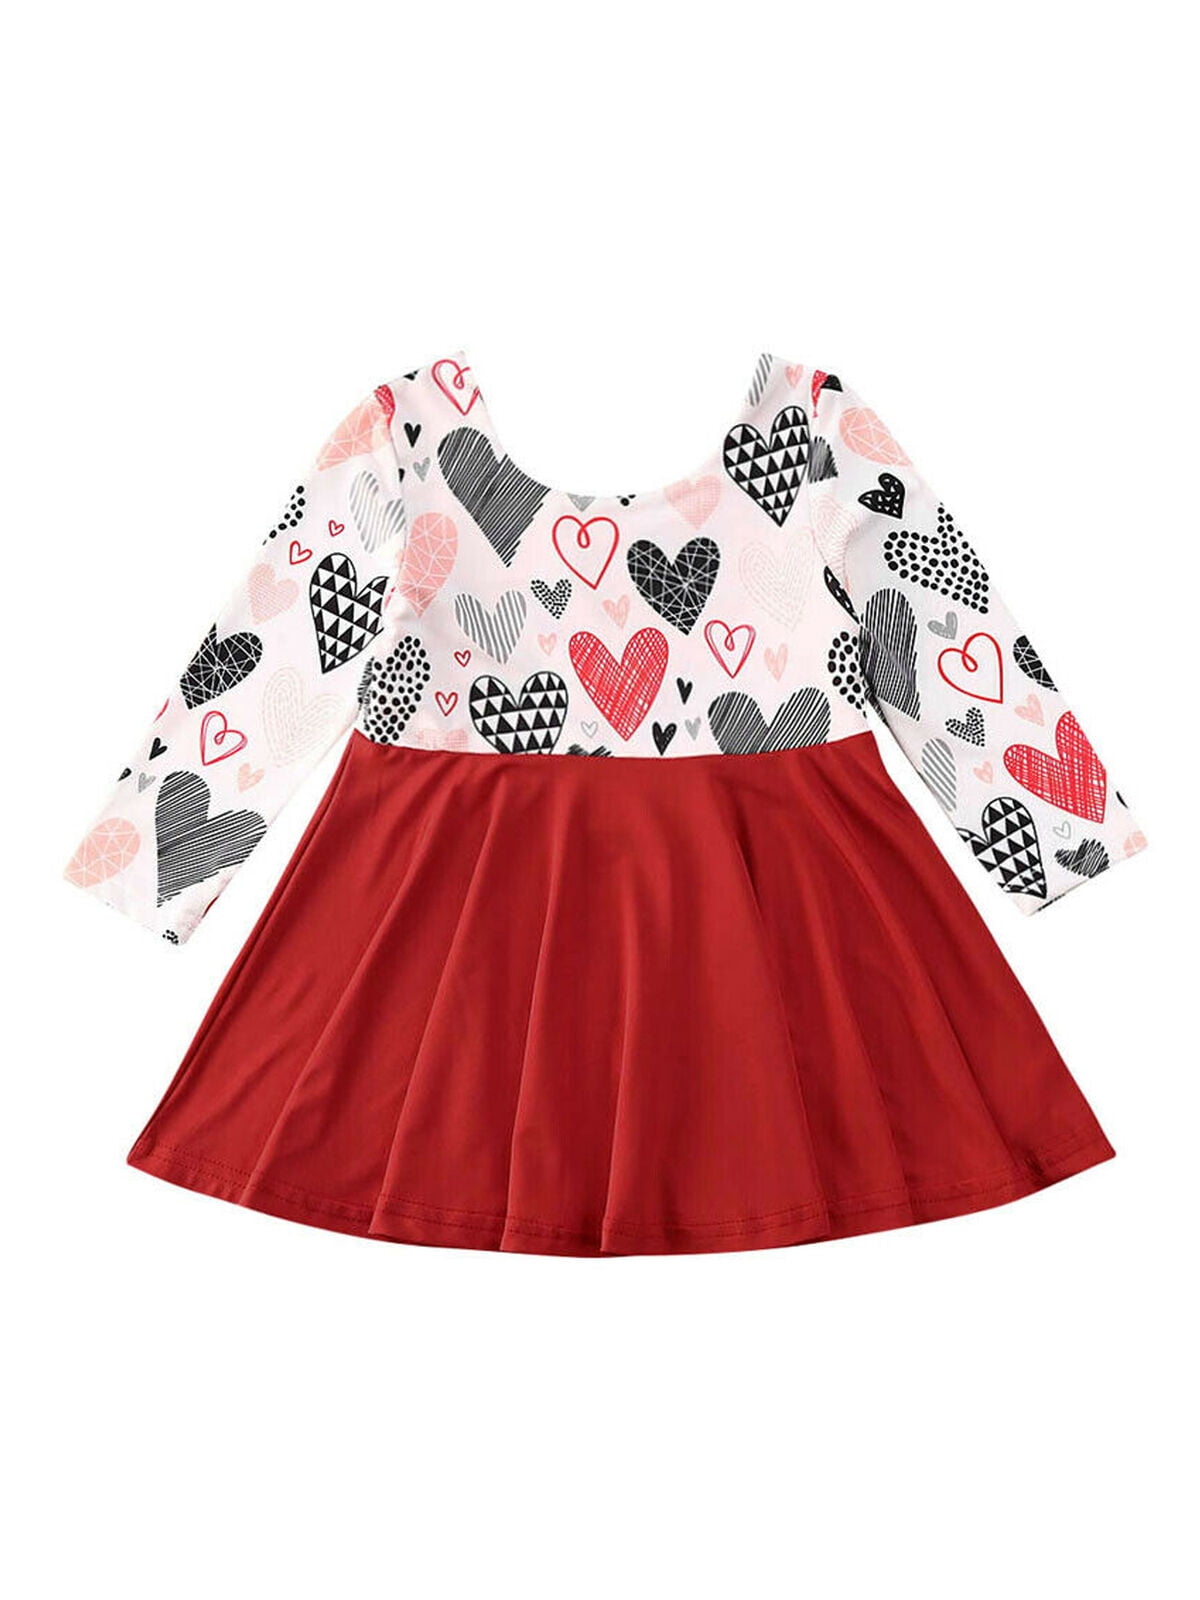 Bonnie Jean NEW dress sz 2T 3T Valentine's Day girl clothes heart red 